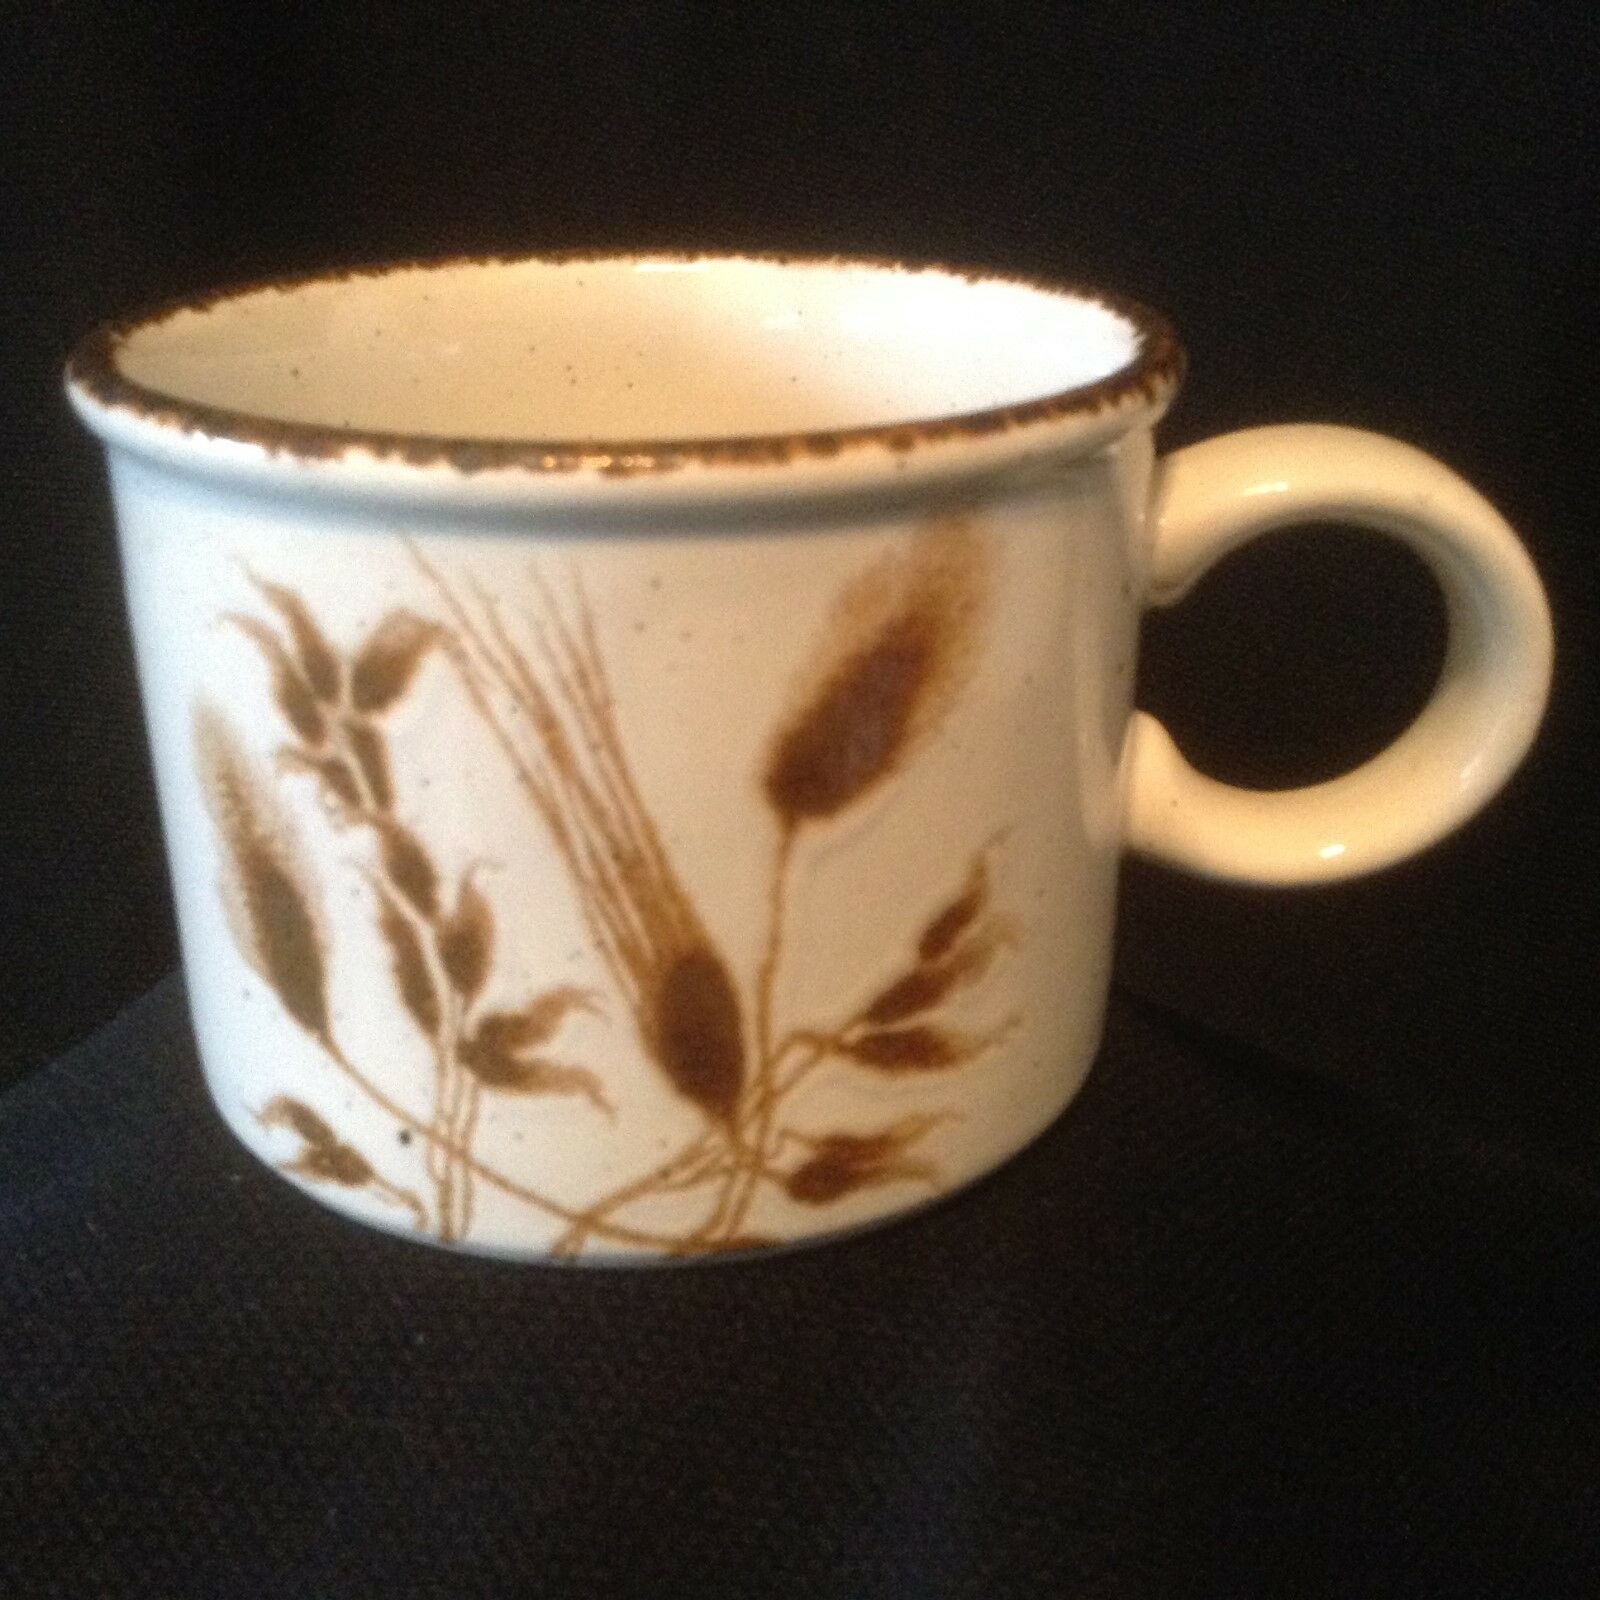 Midwinter Stonehenge Wild Oats Flat Cup England Vintage Brown Speckled Embossed